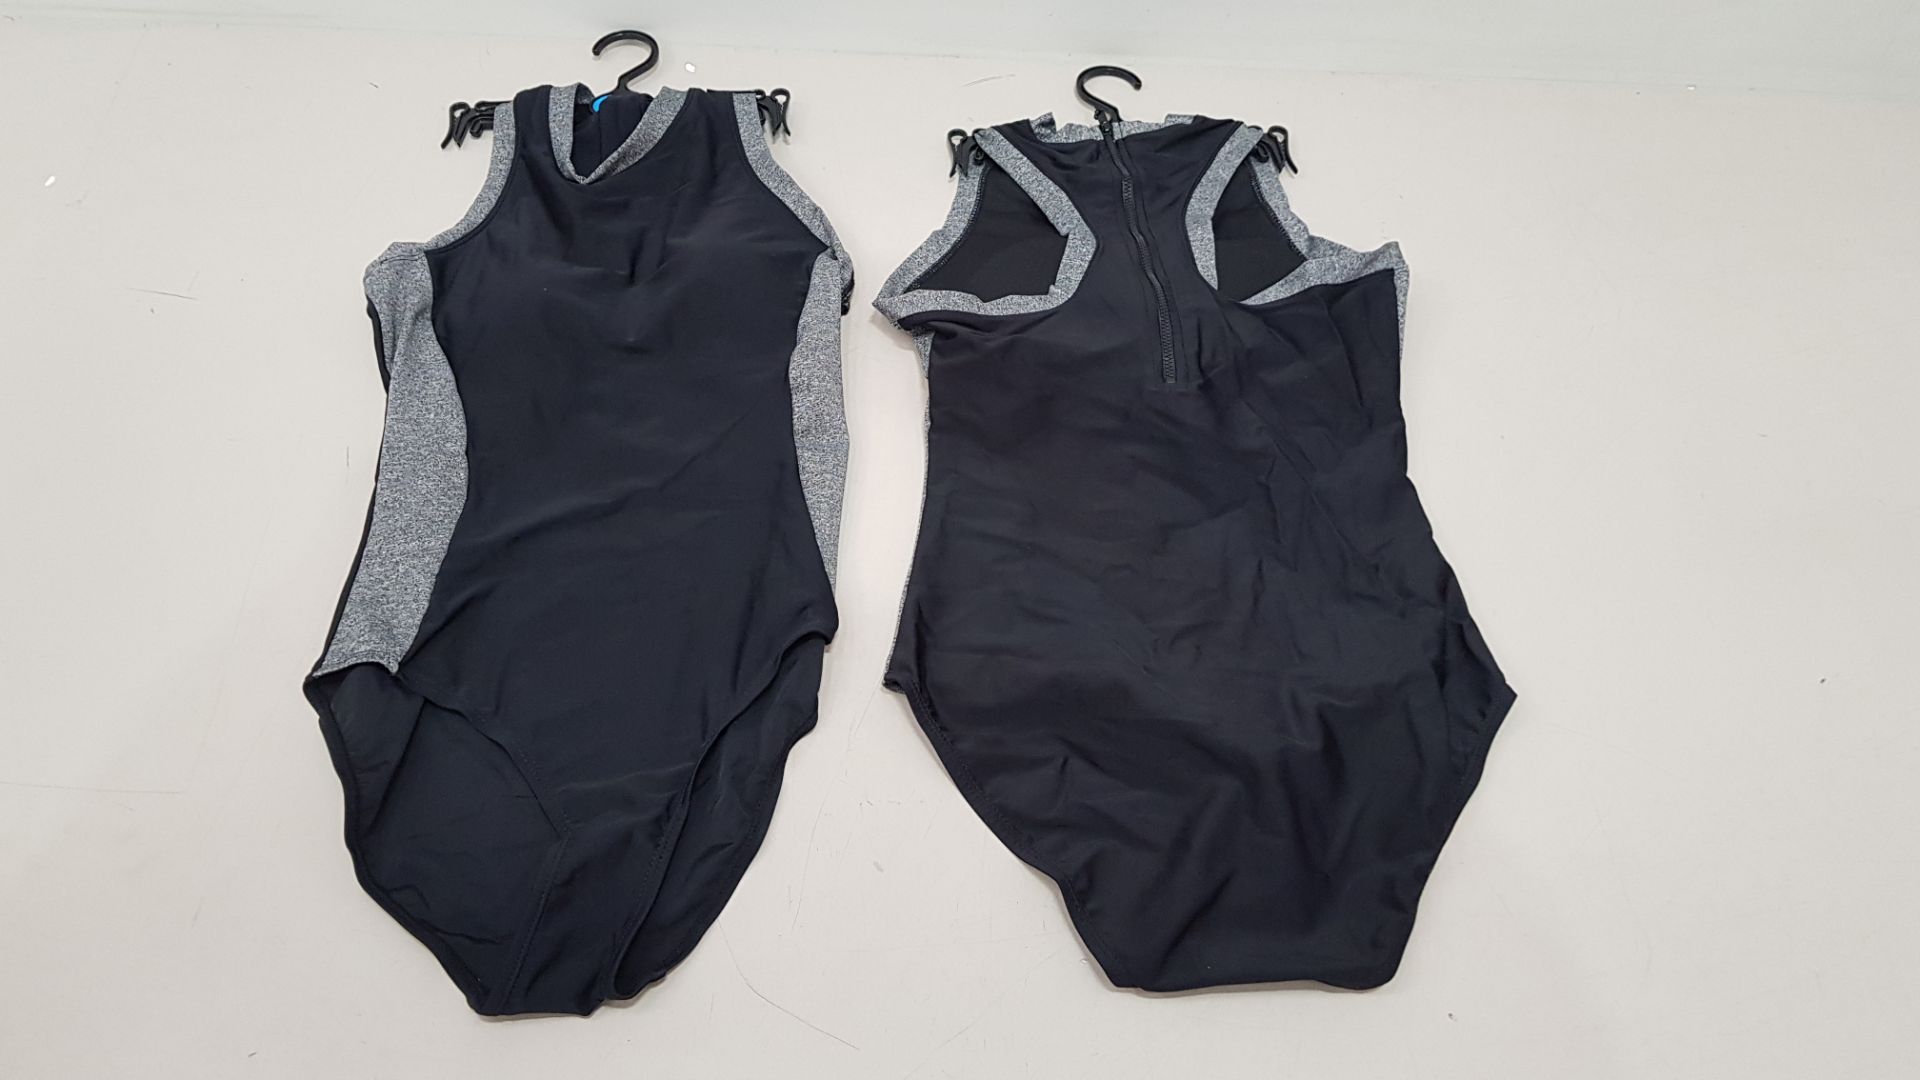 50 X BRAND NEW WORKOUT 1 PIECE SWIMSUITS ZIP UP BACK - IN BLACK AND GREY - IN MIXED SIZES UK 10 /